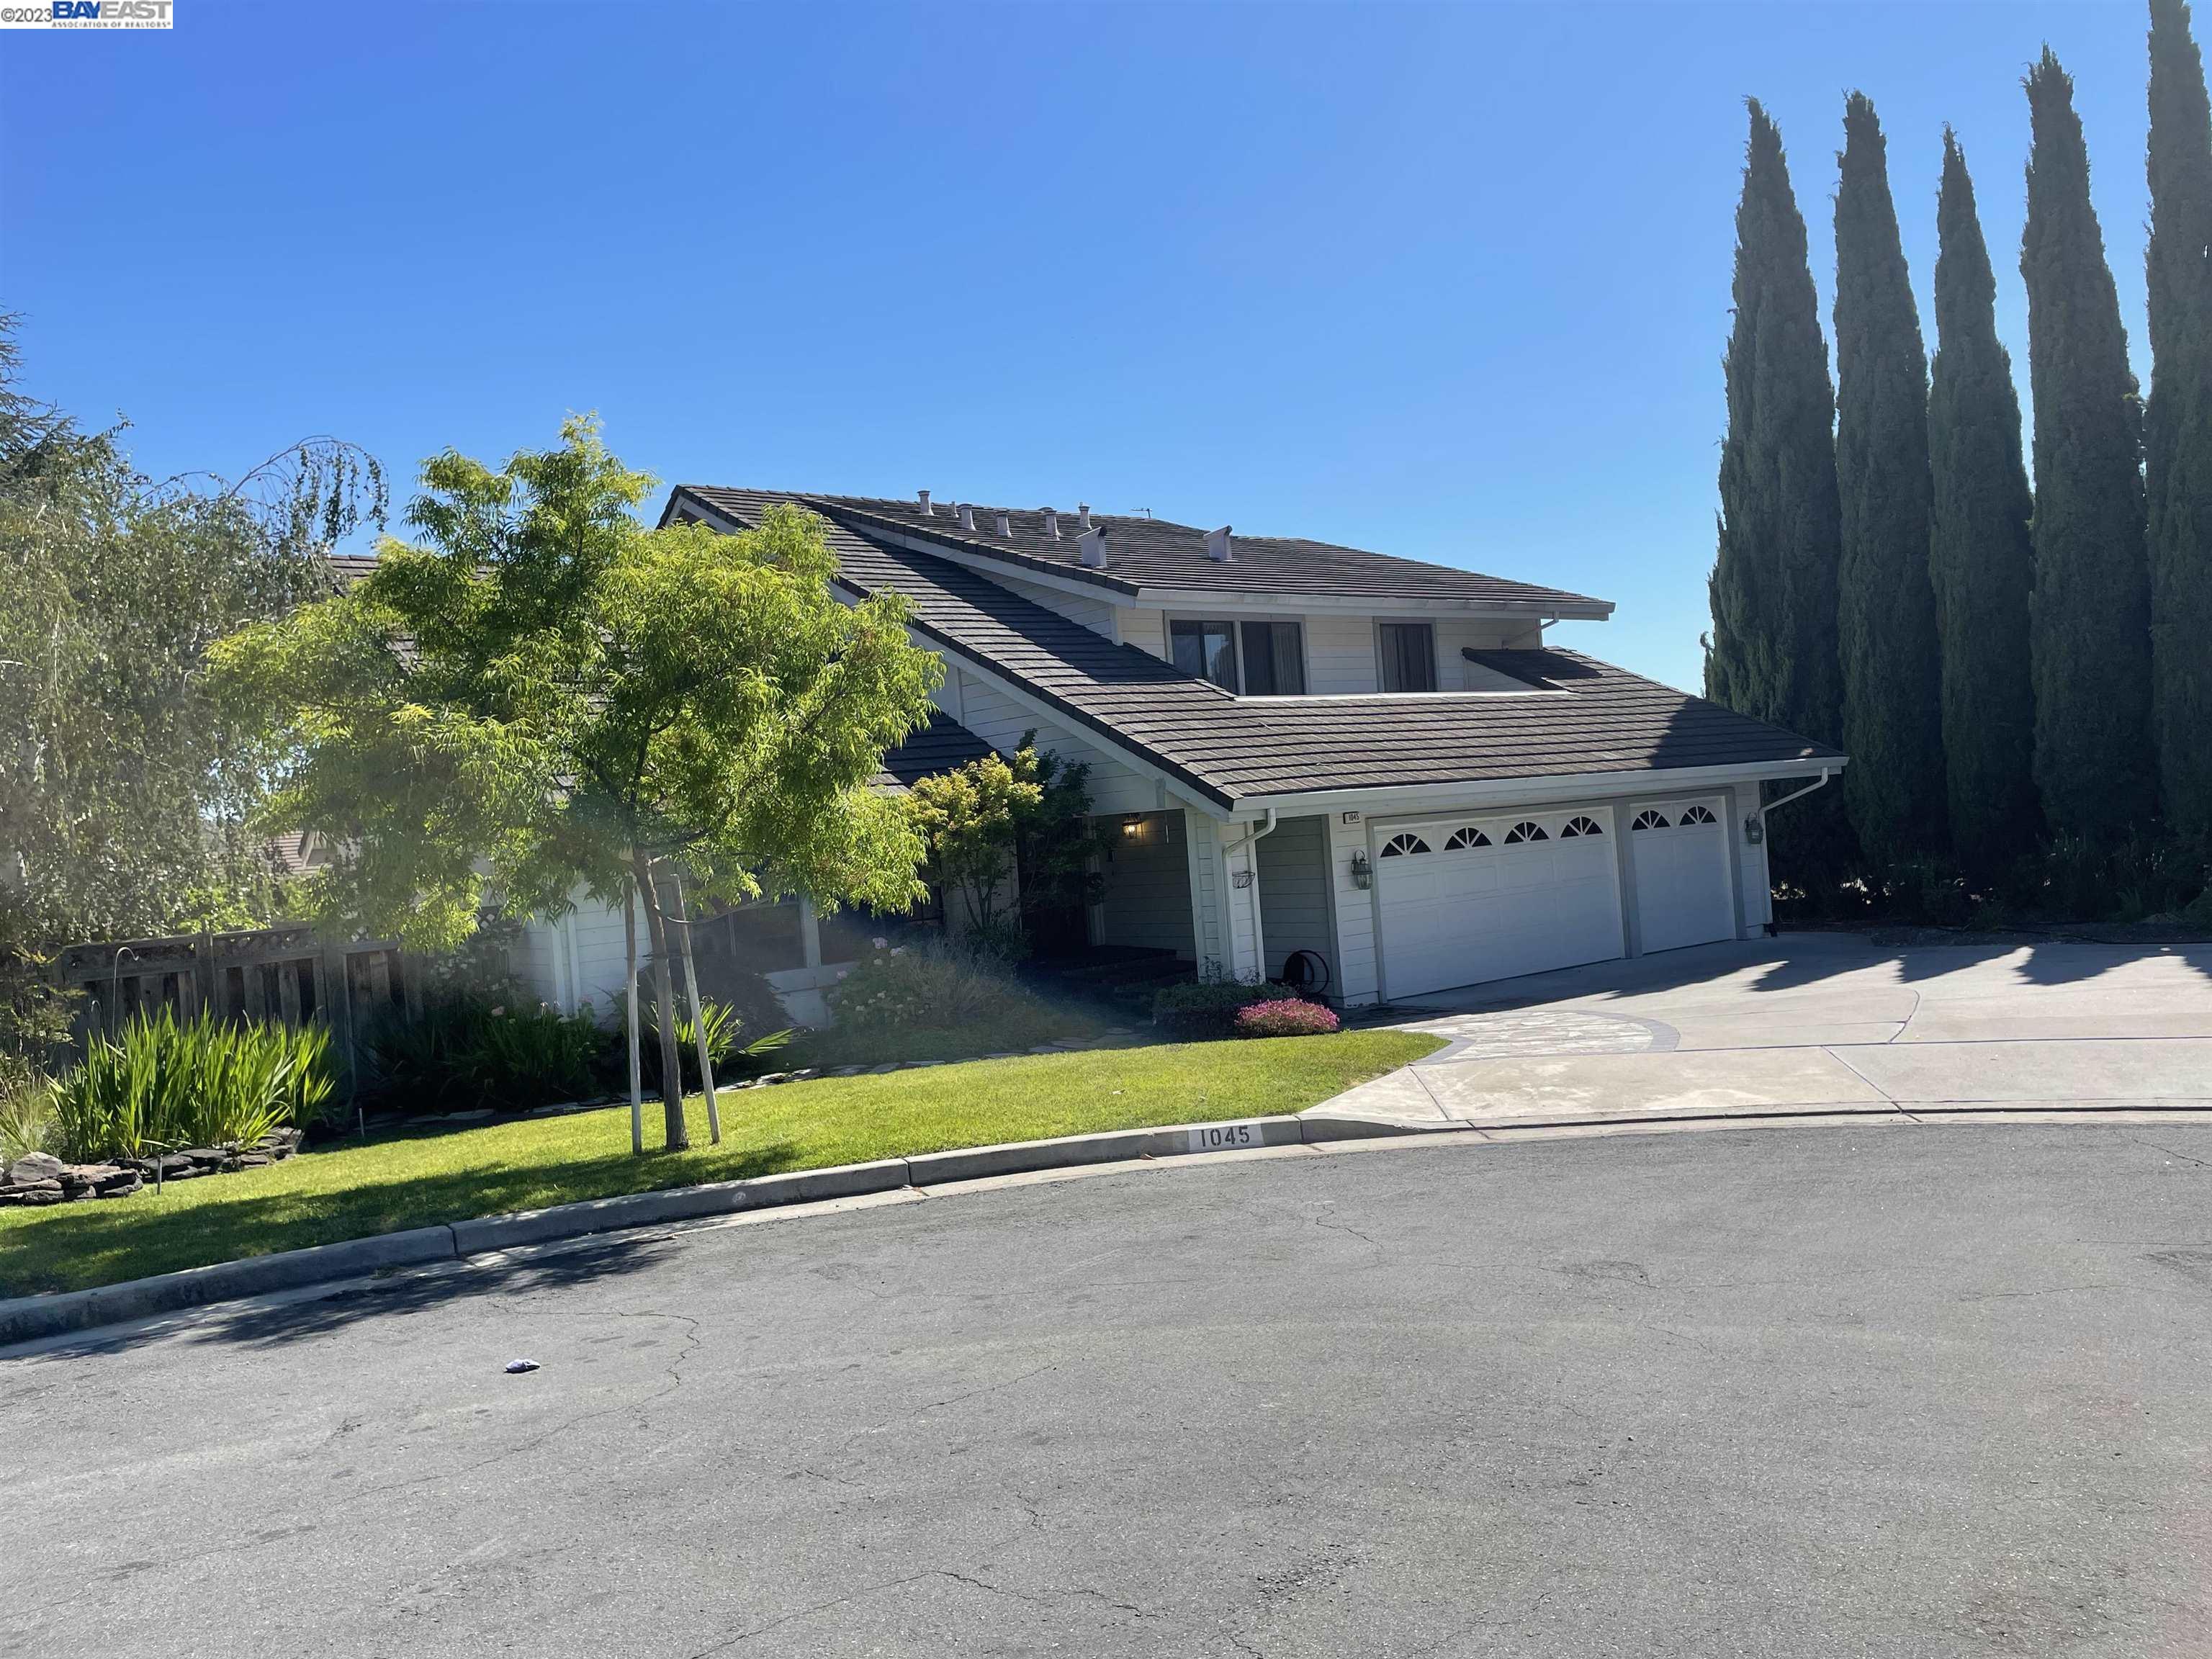 Enjoy Spacious Living in the Large 4,150sf Two-Story Home located on 10,095sf Lot at End of Quiet Ct. in Prestigious Neighborhood in Fremont-Great School District. Home Completely Remodeled in 1992.  Features 5 Bedrooms (one on Ground Floor) 3 Granite Baths updated again in 2013. Huge Rooms for easy entertaining-Living, Dining, Family Rm, Kitchen (Granite Counters with SS Appliances) Breakfast Rm. Huge Master BR Upstairs with Large Bath/Tub/Stall Shower - Opens to Outside Porch.  Home is 5 minutes from Tesla and BART, easy access to Silicon Valley or SFO. Wonderful for Executive Family.  Owner will also consider multiple tenants under ONE lease.  Available Nov. 15, 2023.  You will Want to live in this Area!